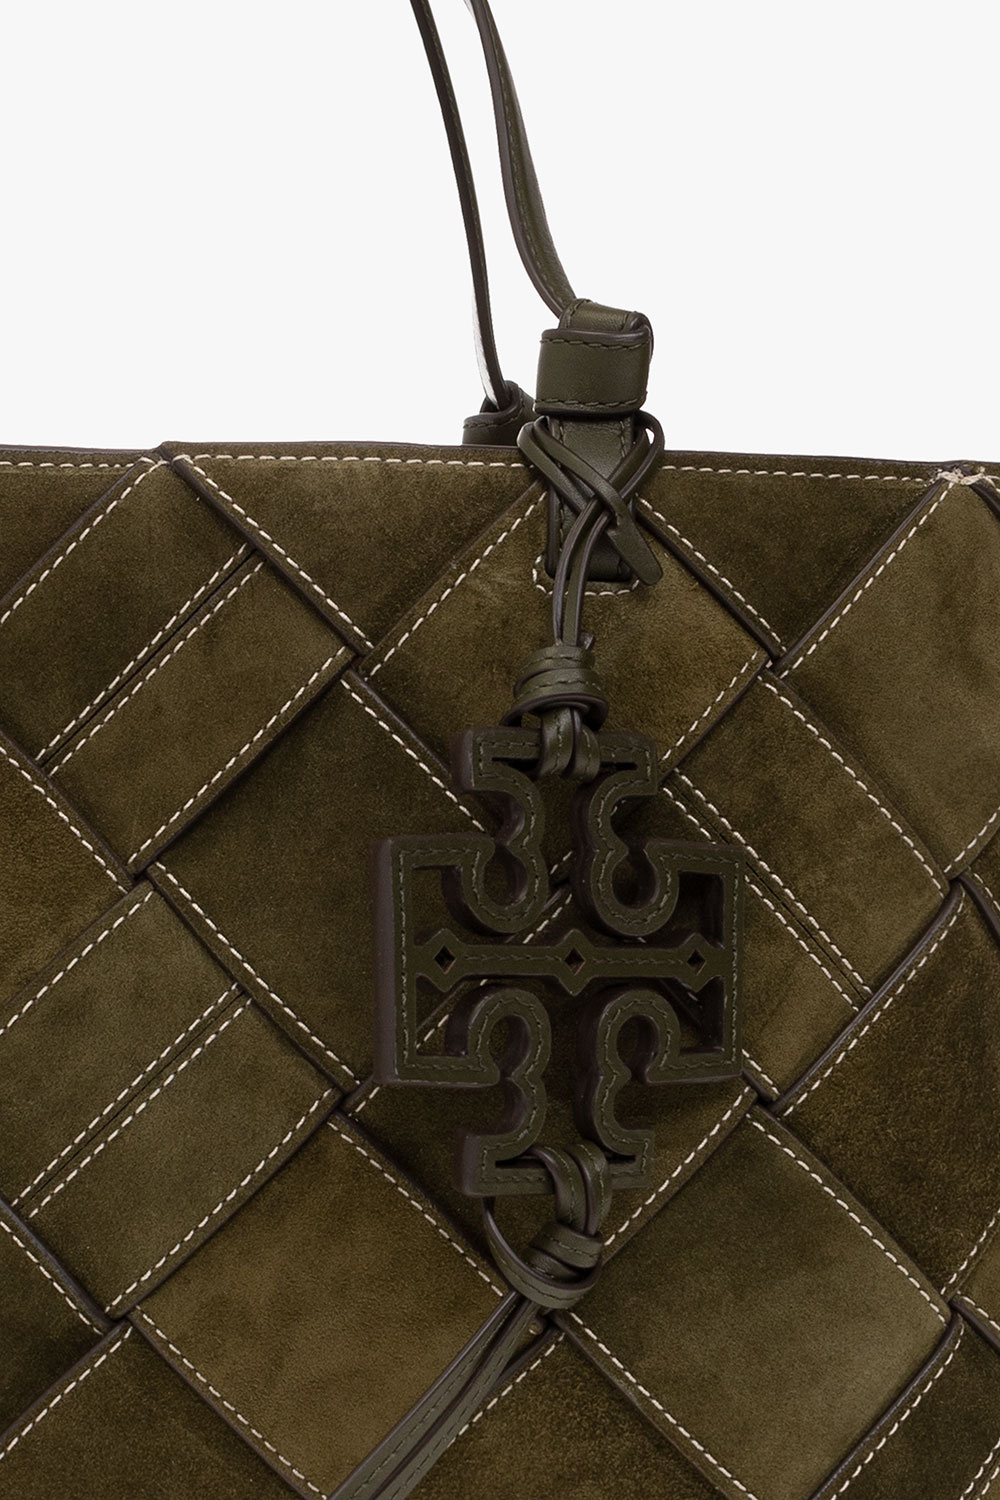 Tory Burch T Monogram Leather Camera Bag in Green